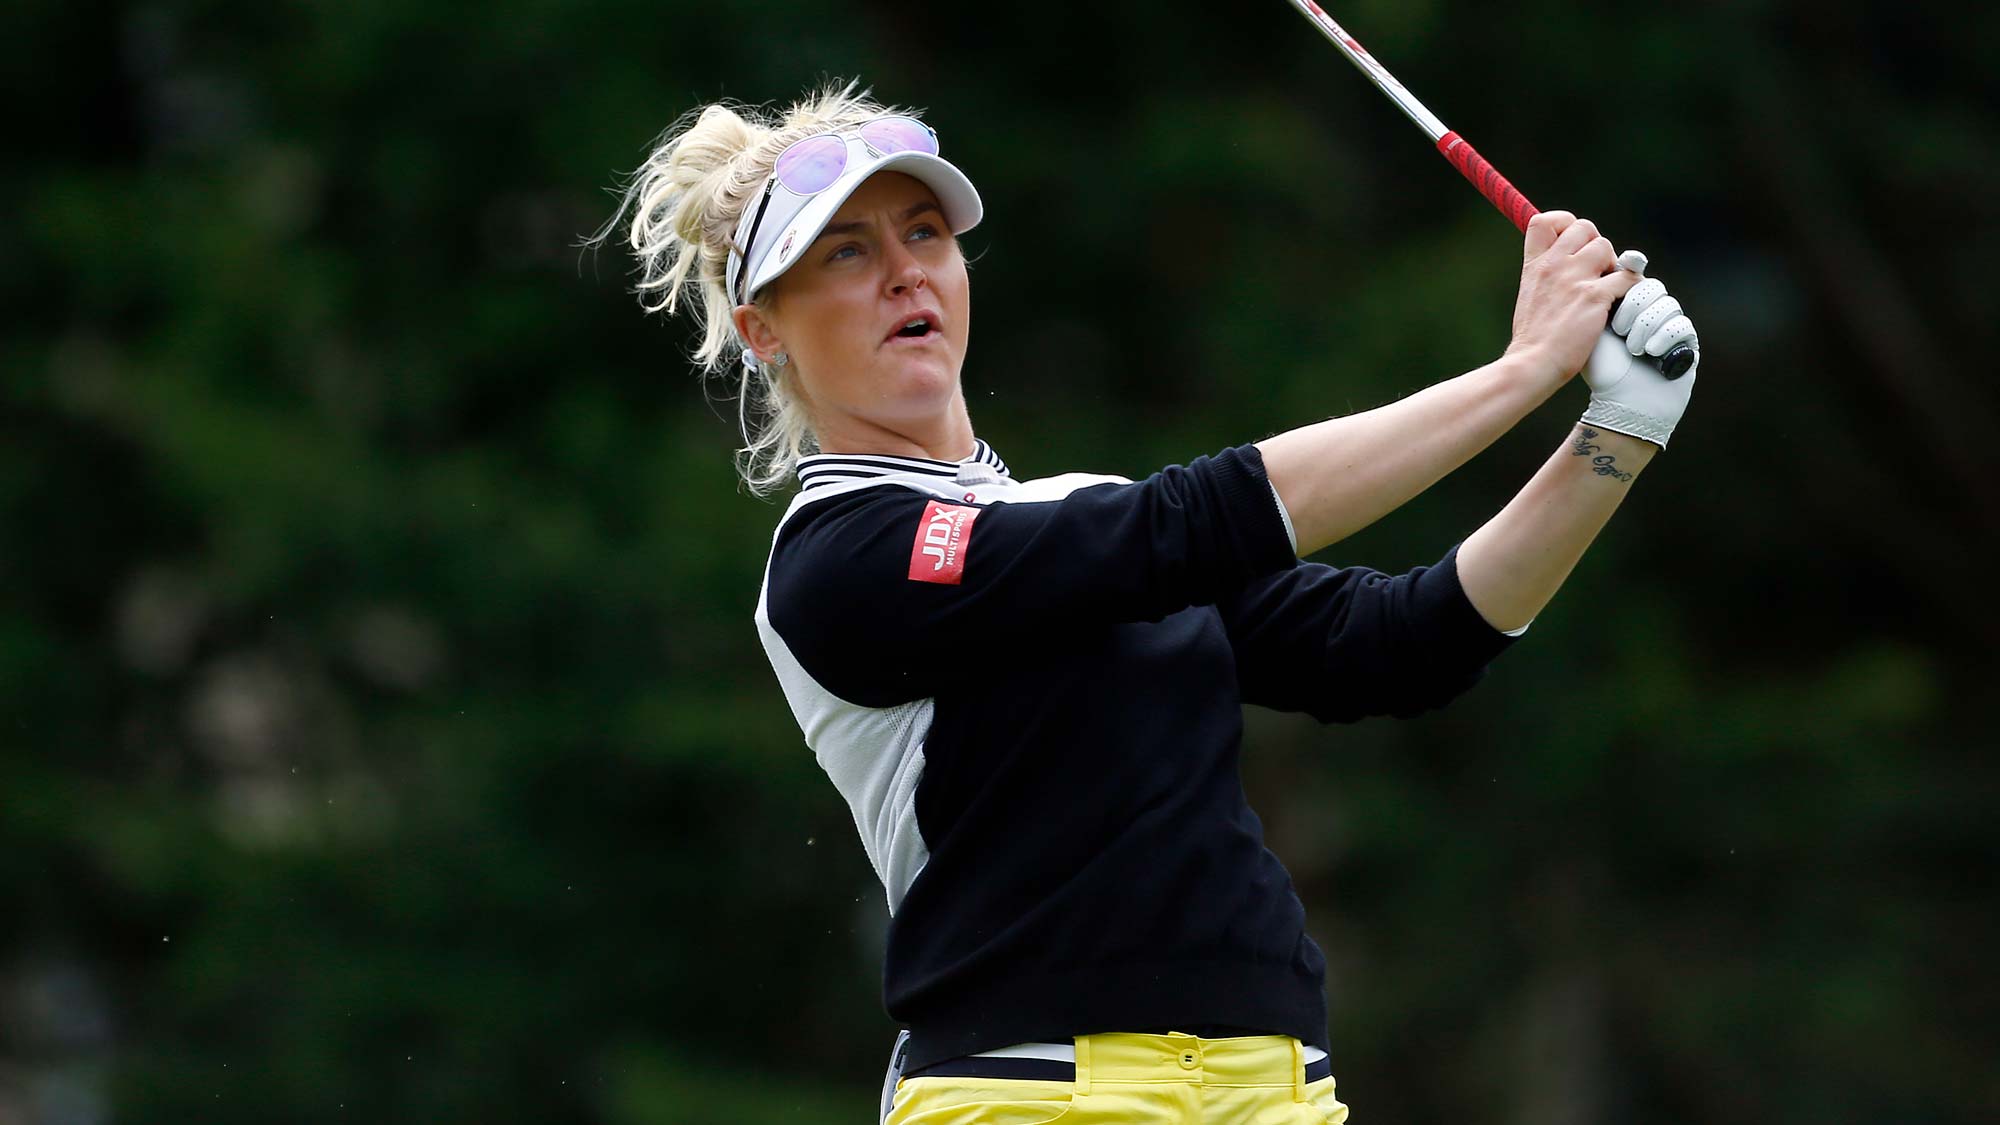 Charley Hull of England tees of on the 3rd hole during the final round of the LPGA Mediheal Championship